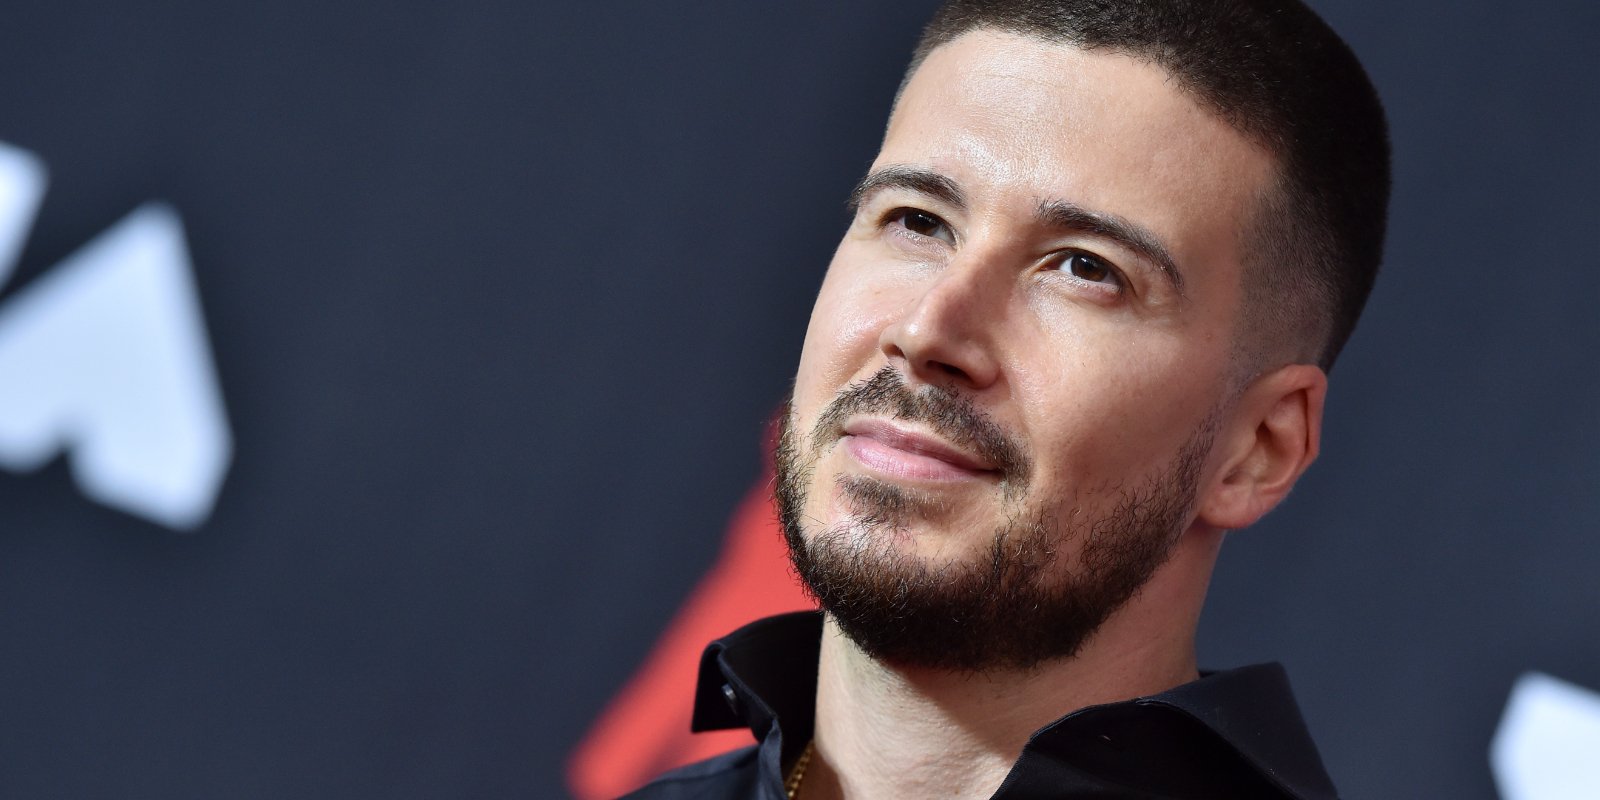 ‘Dancing with the Stars’ Vinny Guadagnino Says 2009 Is His Most Memorable Year for the Most Obvious Reason Say Fans